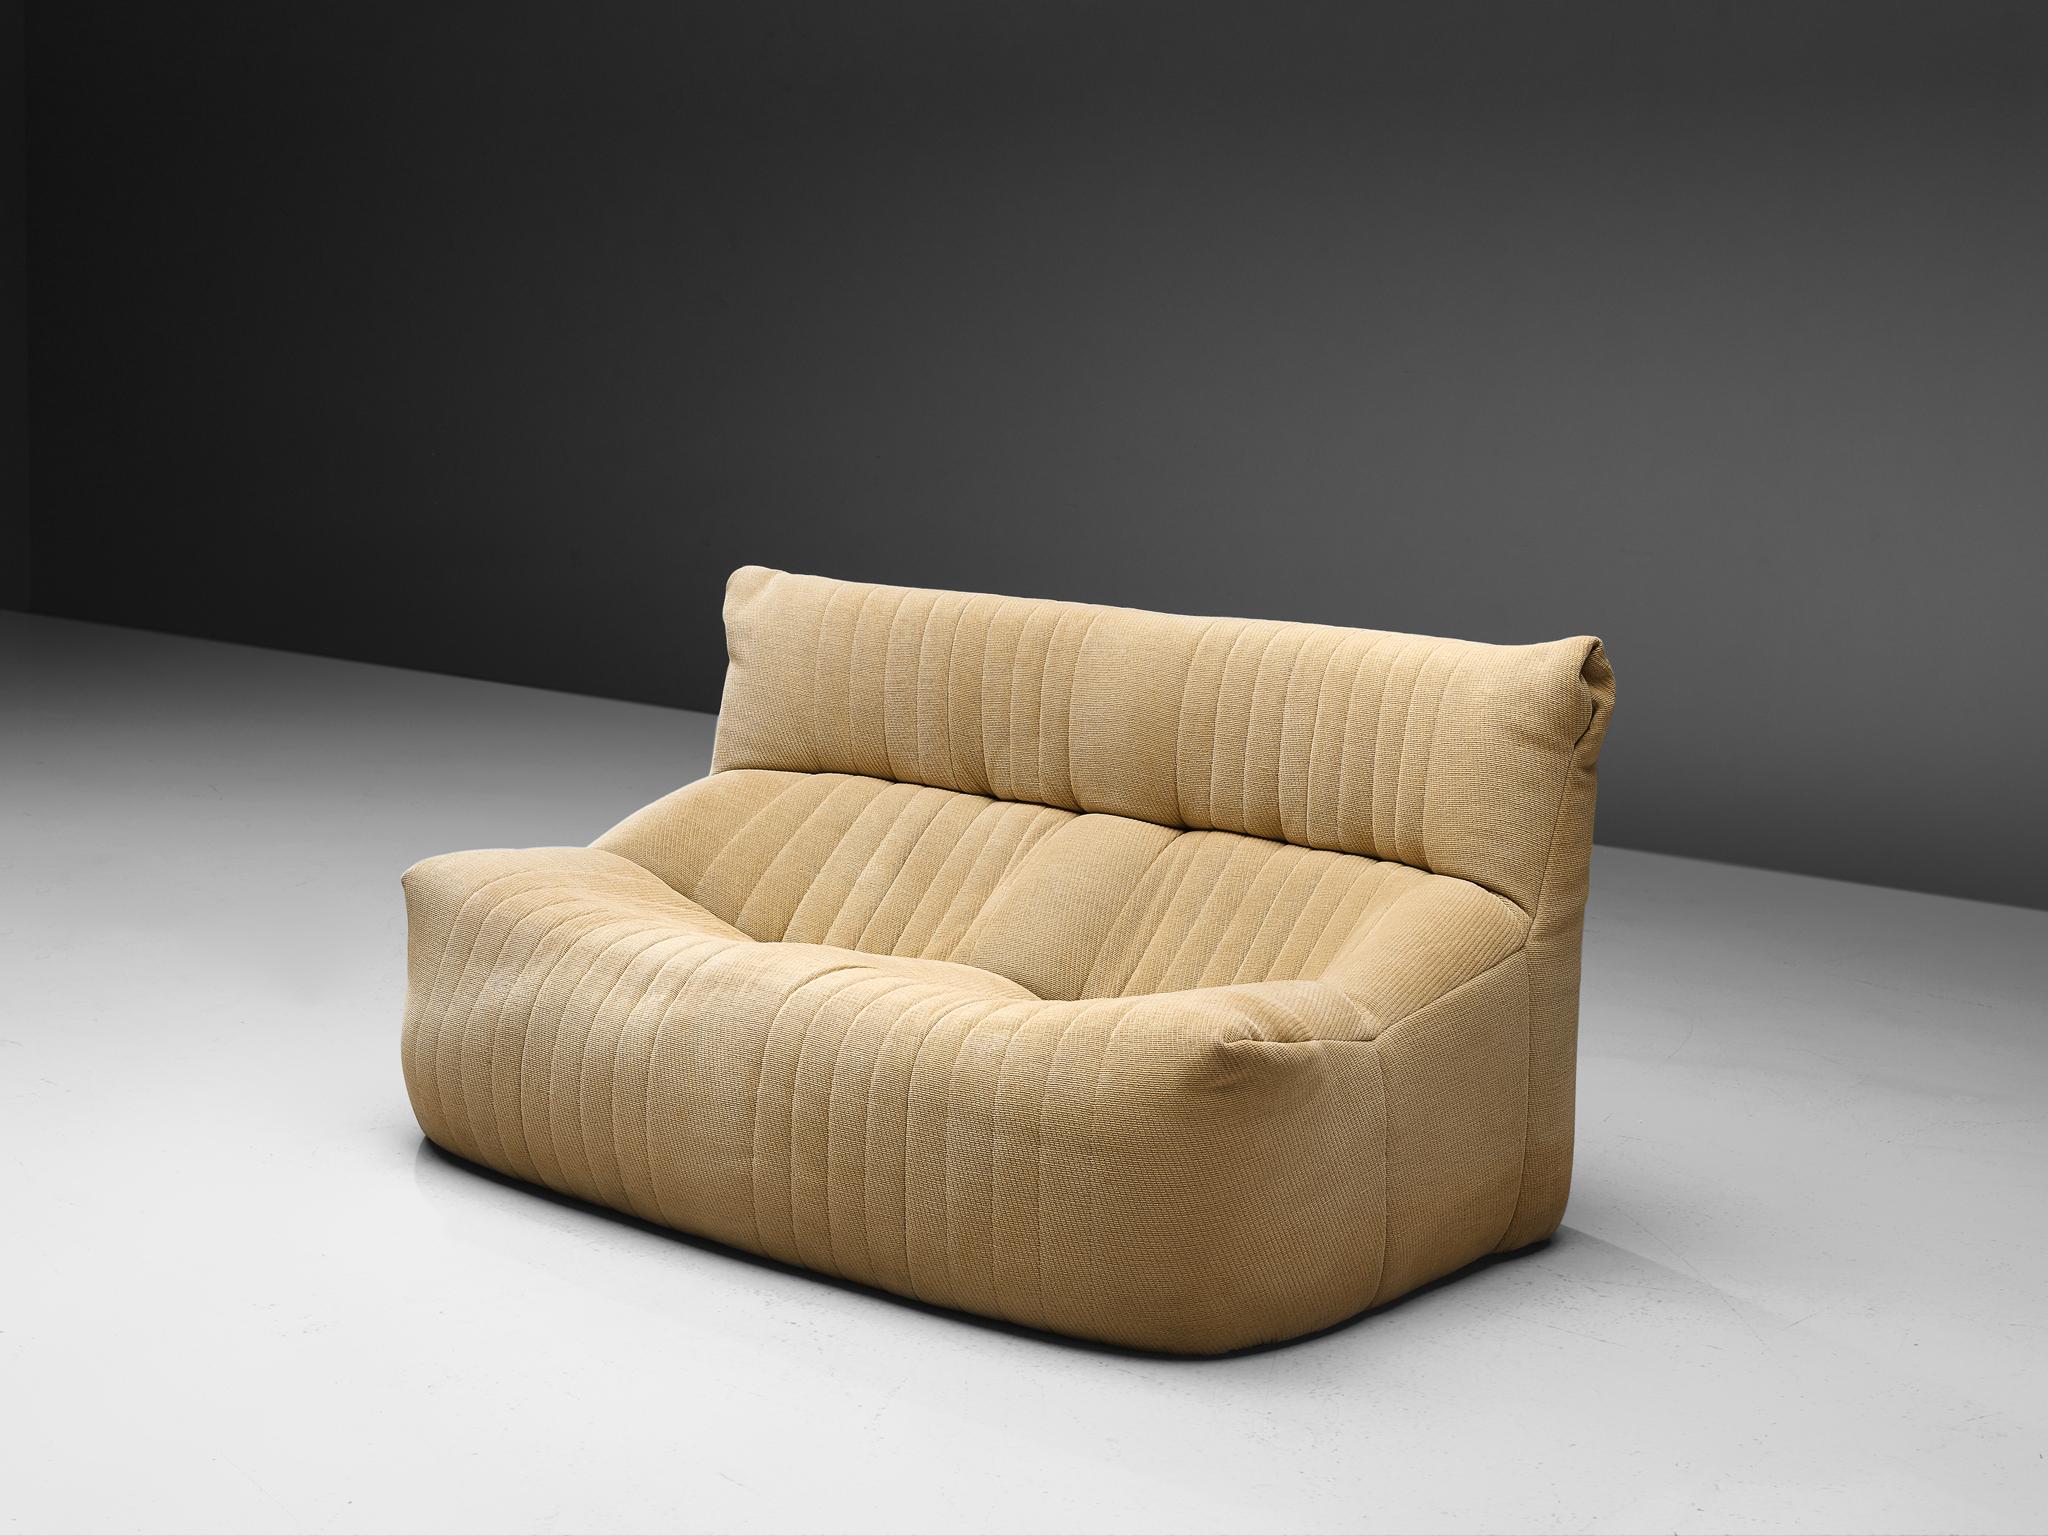 Ligne Roset, sofa, fabric, France, circa 1973.

This comfortable and grand two-seater sofa is manufacture by Ligne Roset. This model features a solid base with a rounded, bulky seat and a high back. The fabric is tufted with vertical lines. A highly